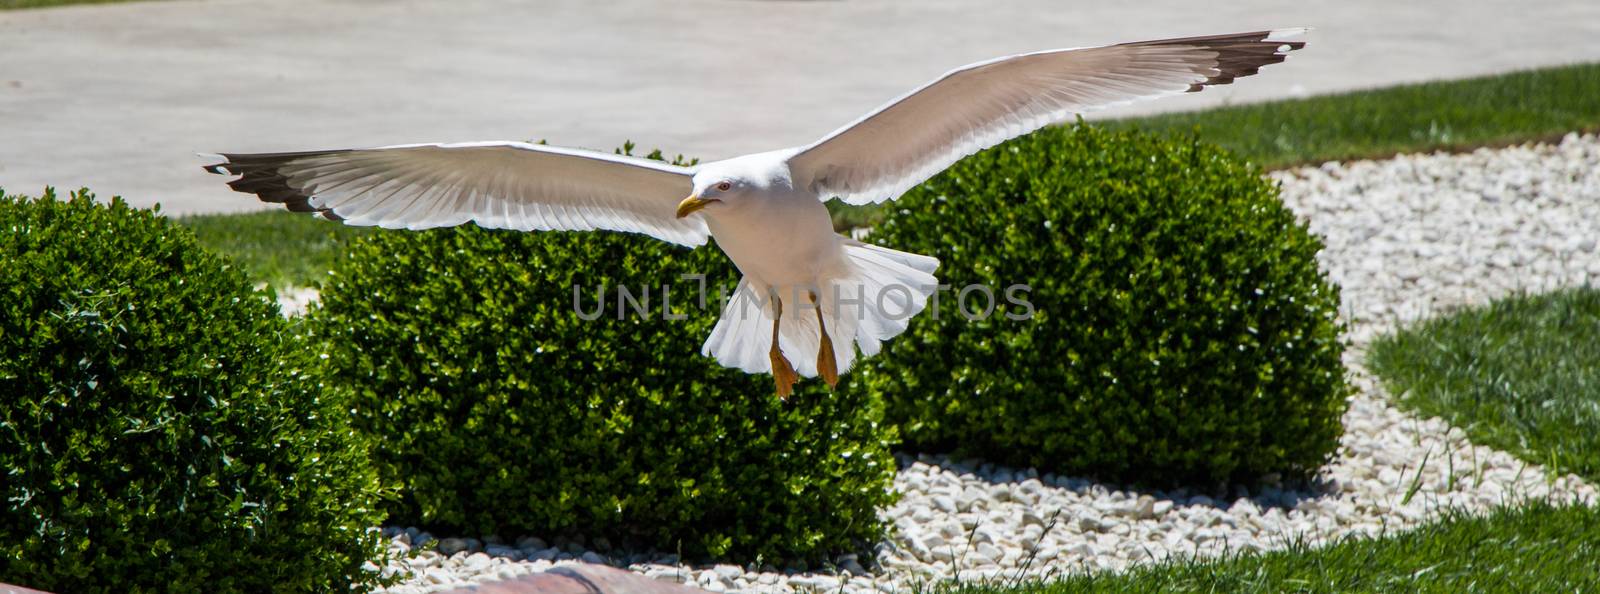 Seagull flying over the trees in a garden by berkay